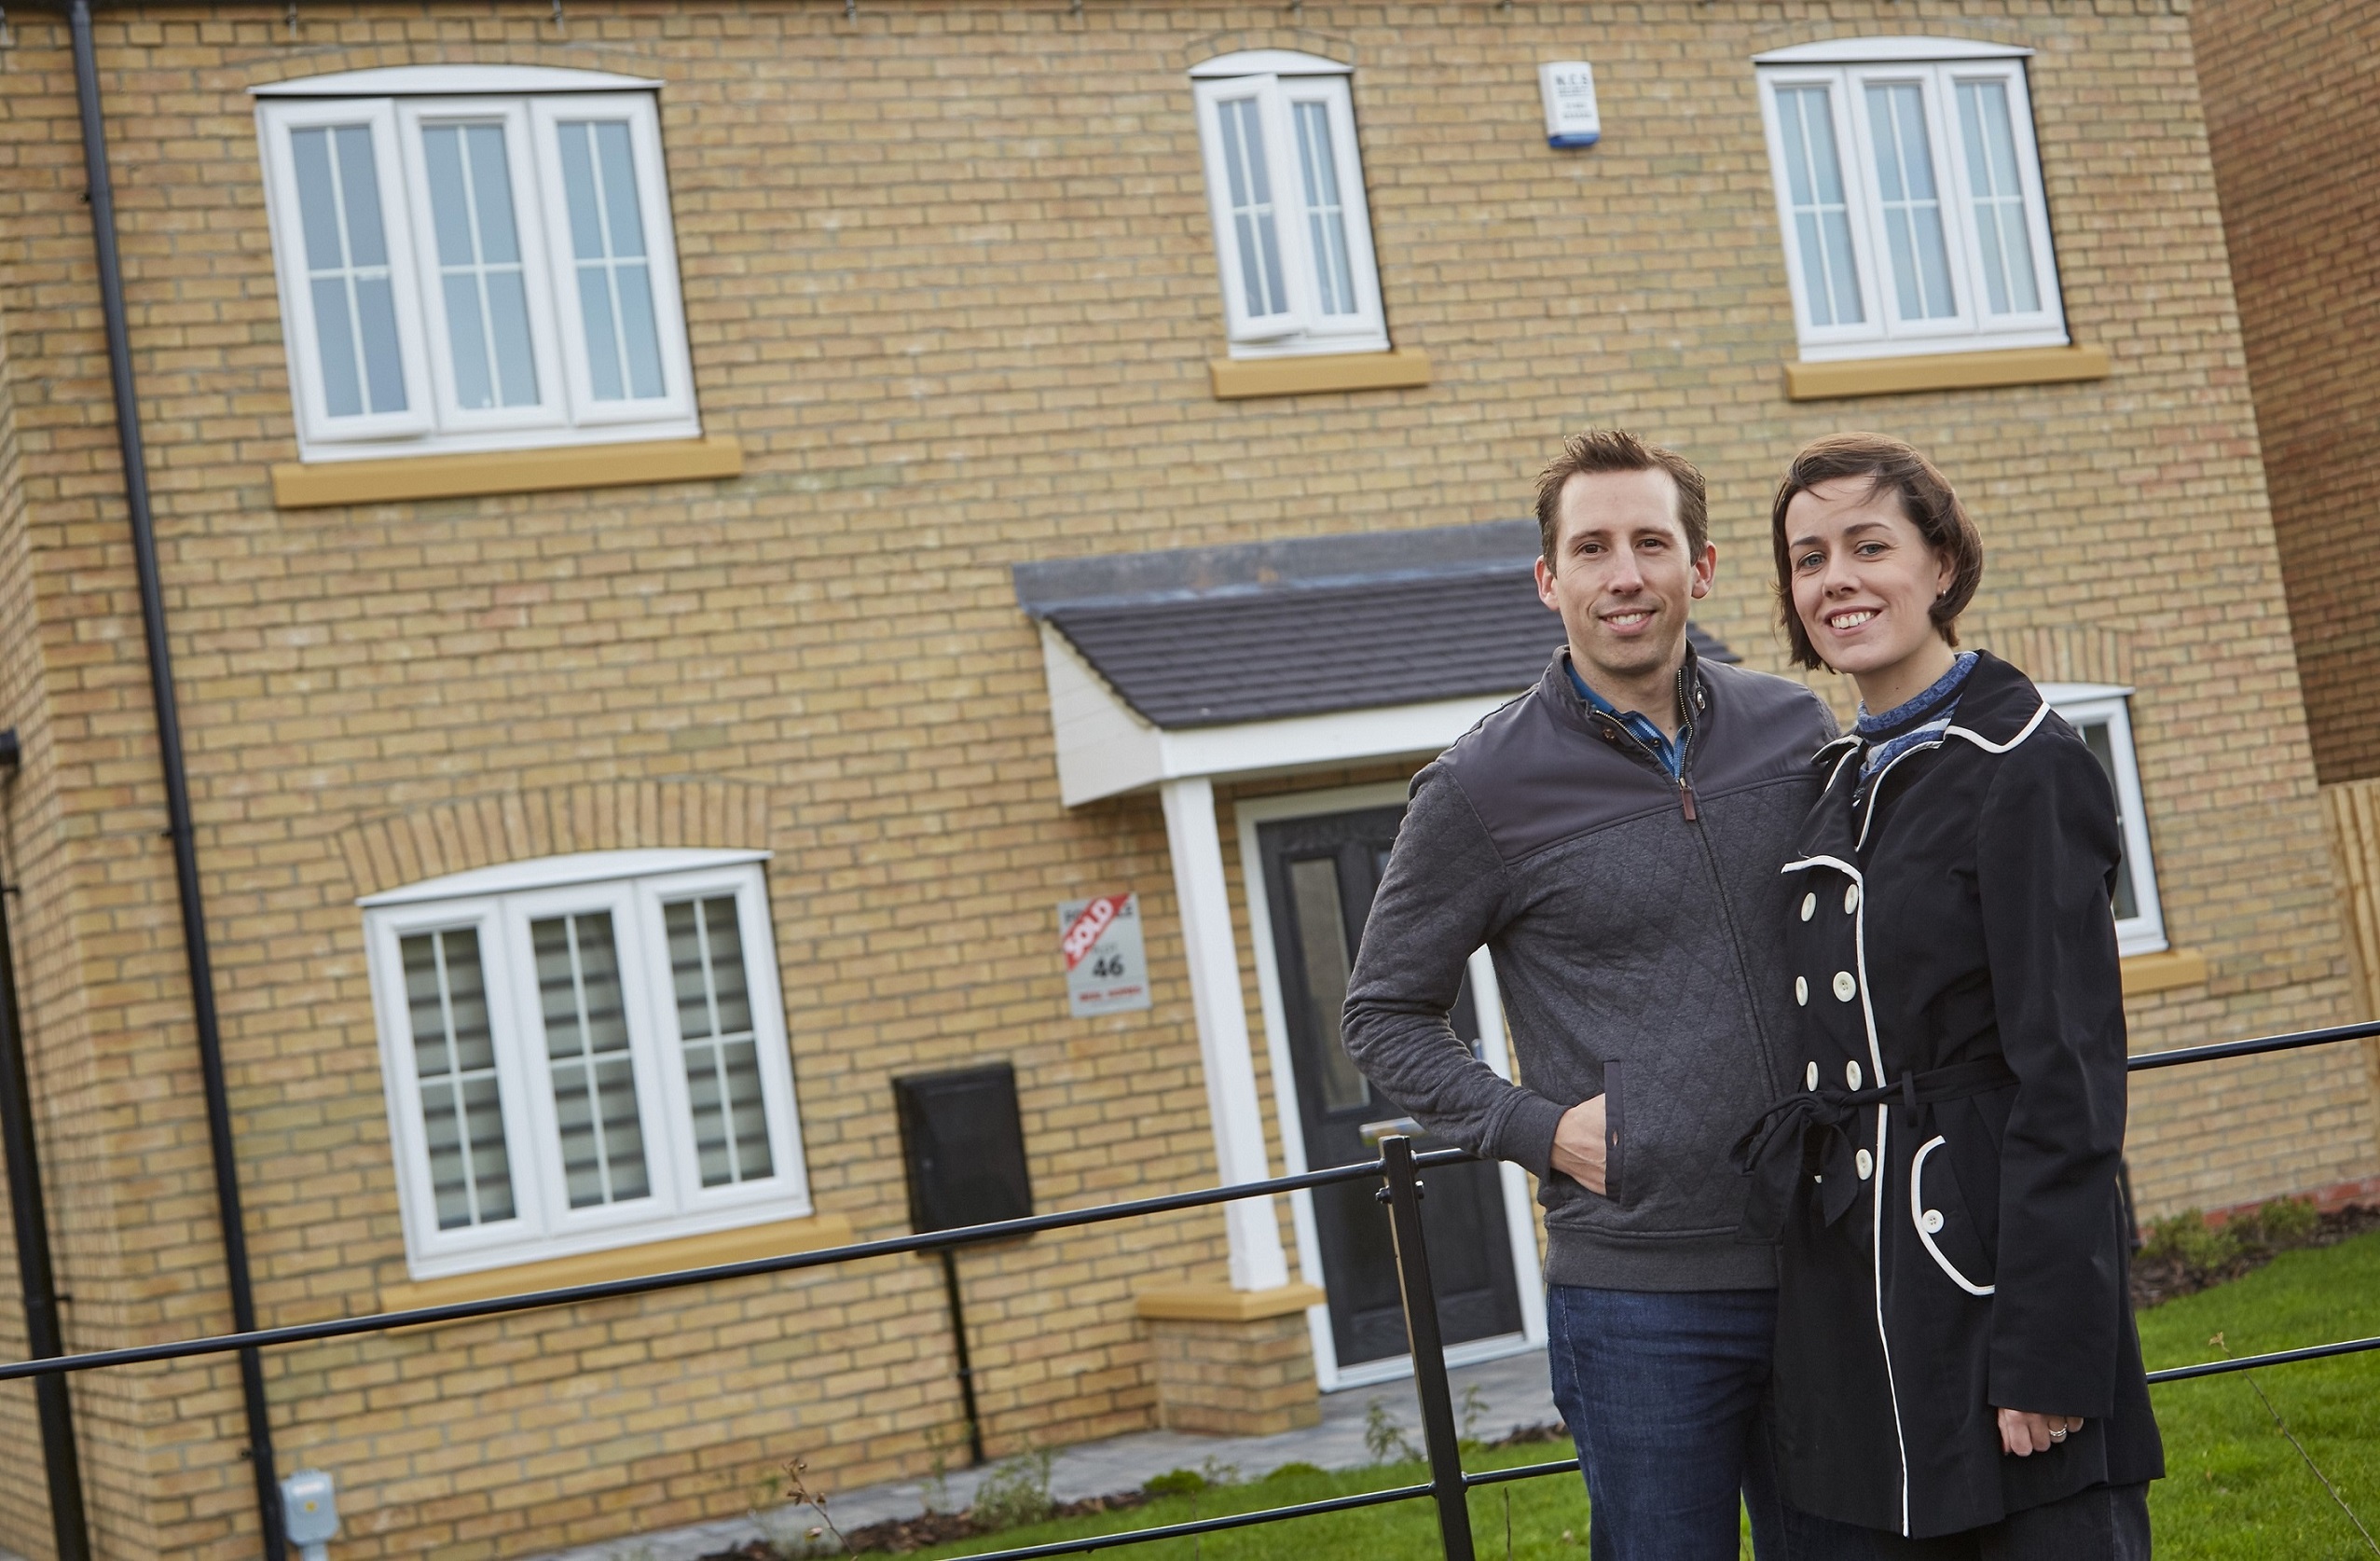 You are currently viewing Beal staff among first residents of fast-selling Beverley development